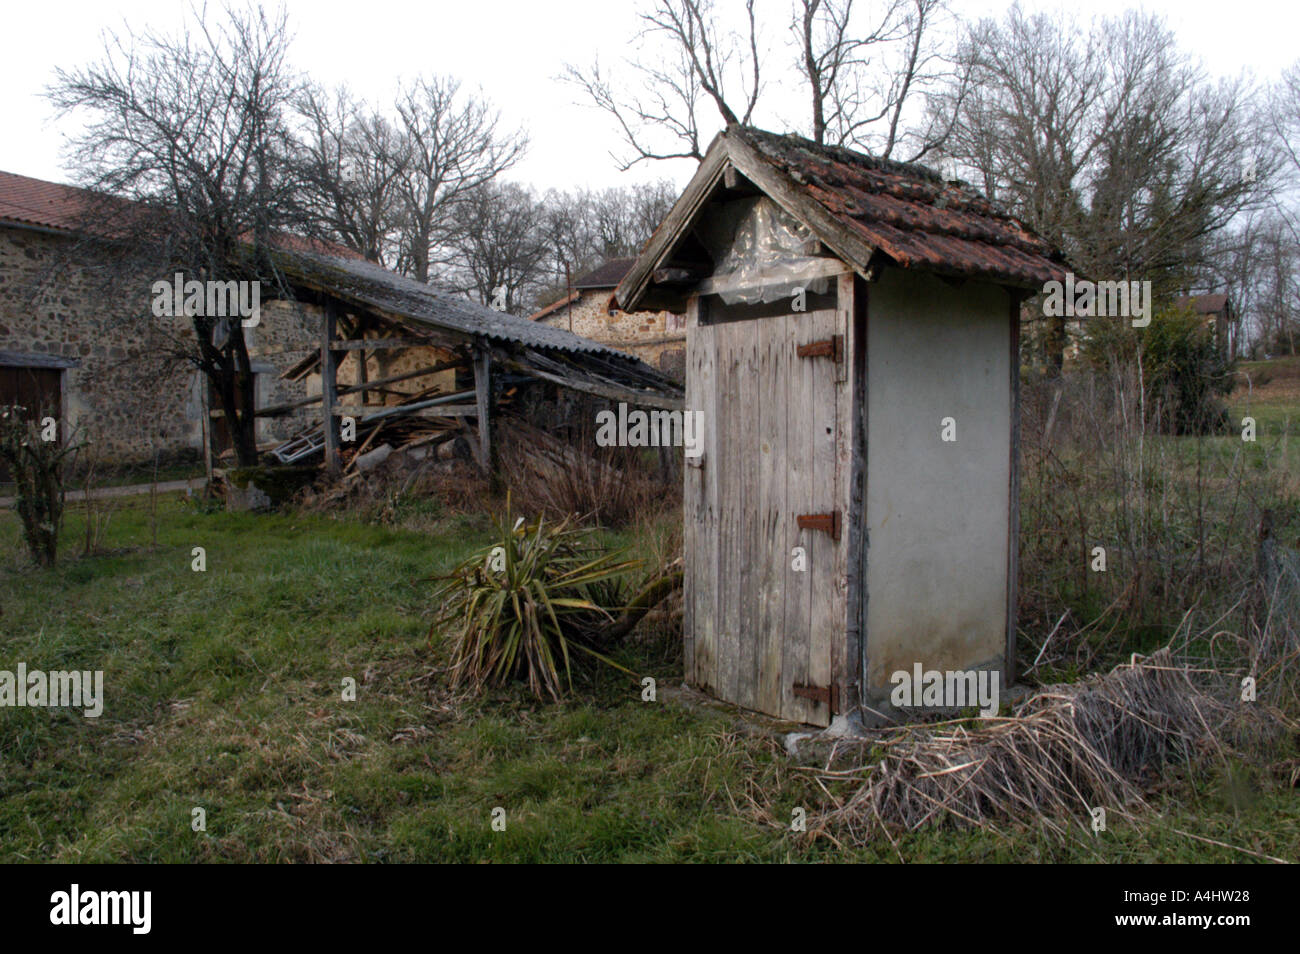 outside toilet made of wood and tiles france st jean de cole Stock Photo